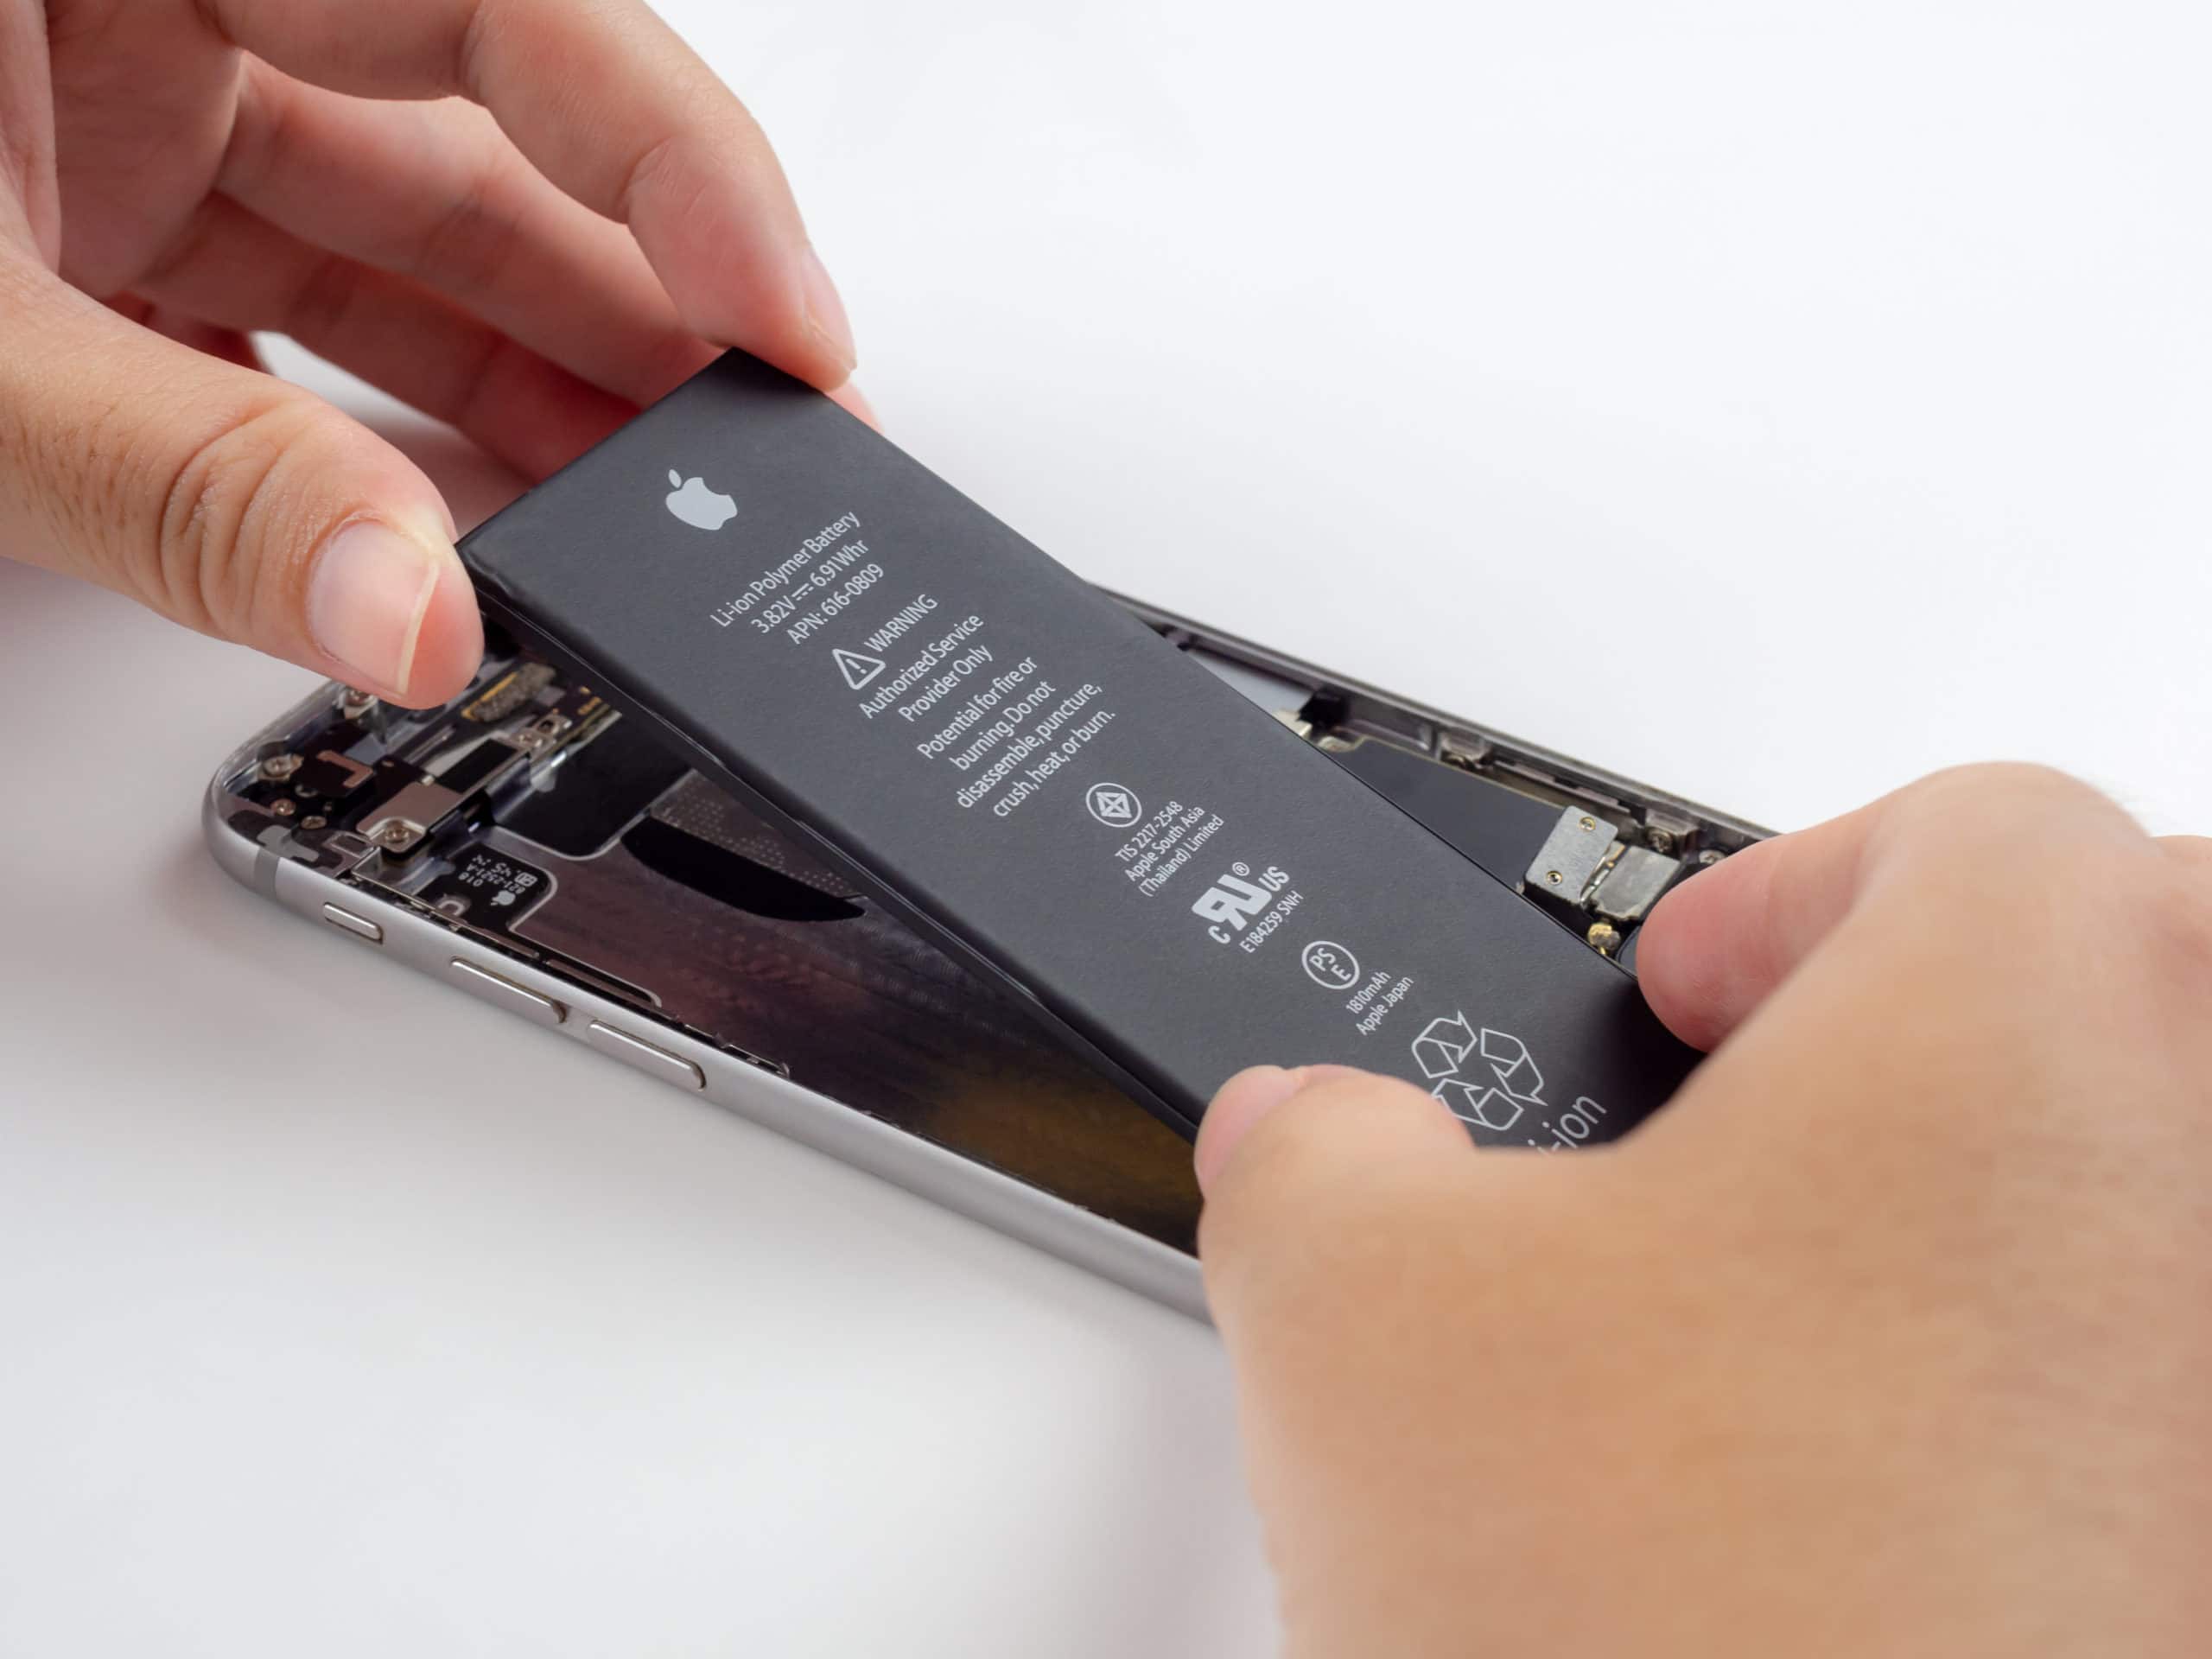 Apple will pay up to $ 500 million in lawsuit involving batteries of iPhones